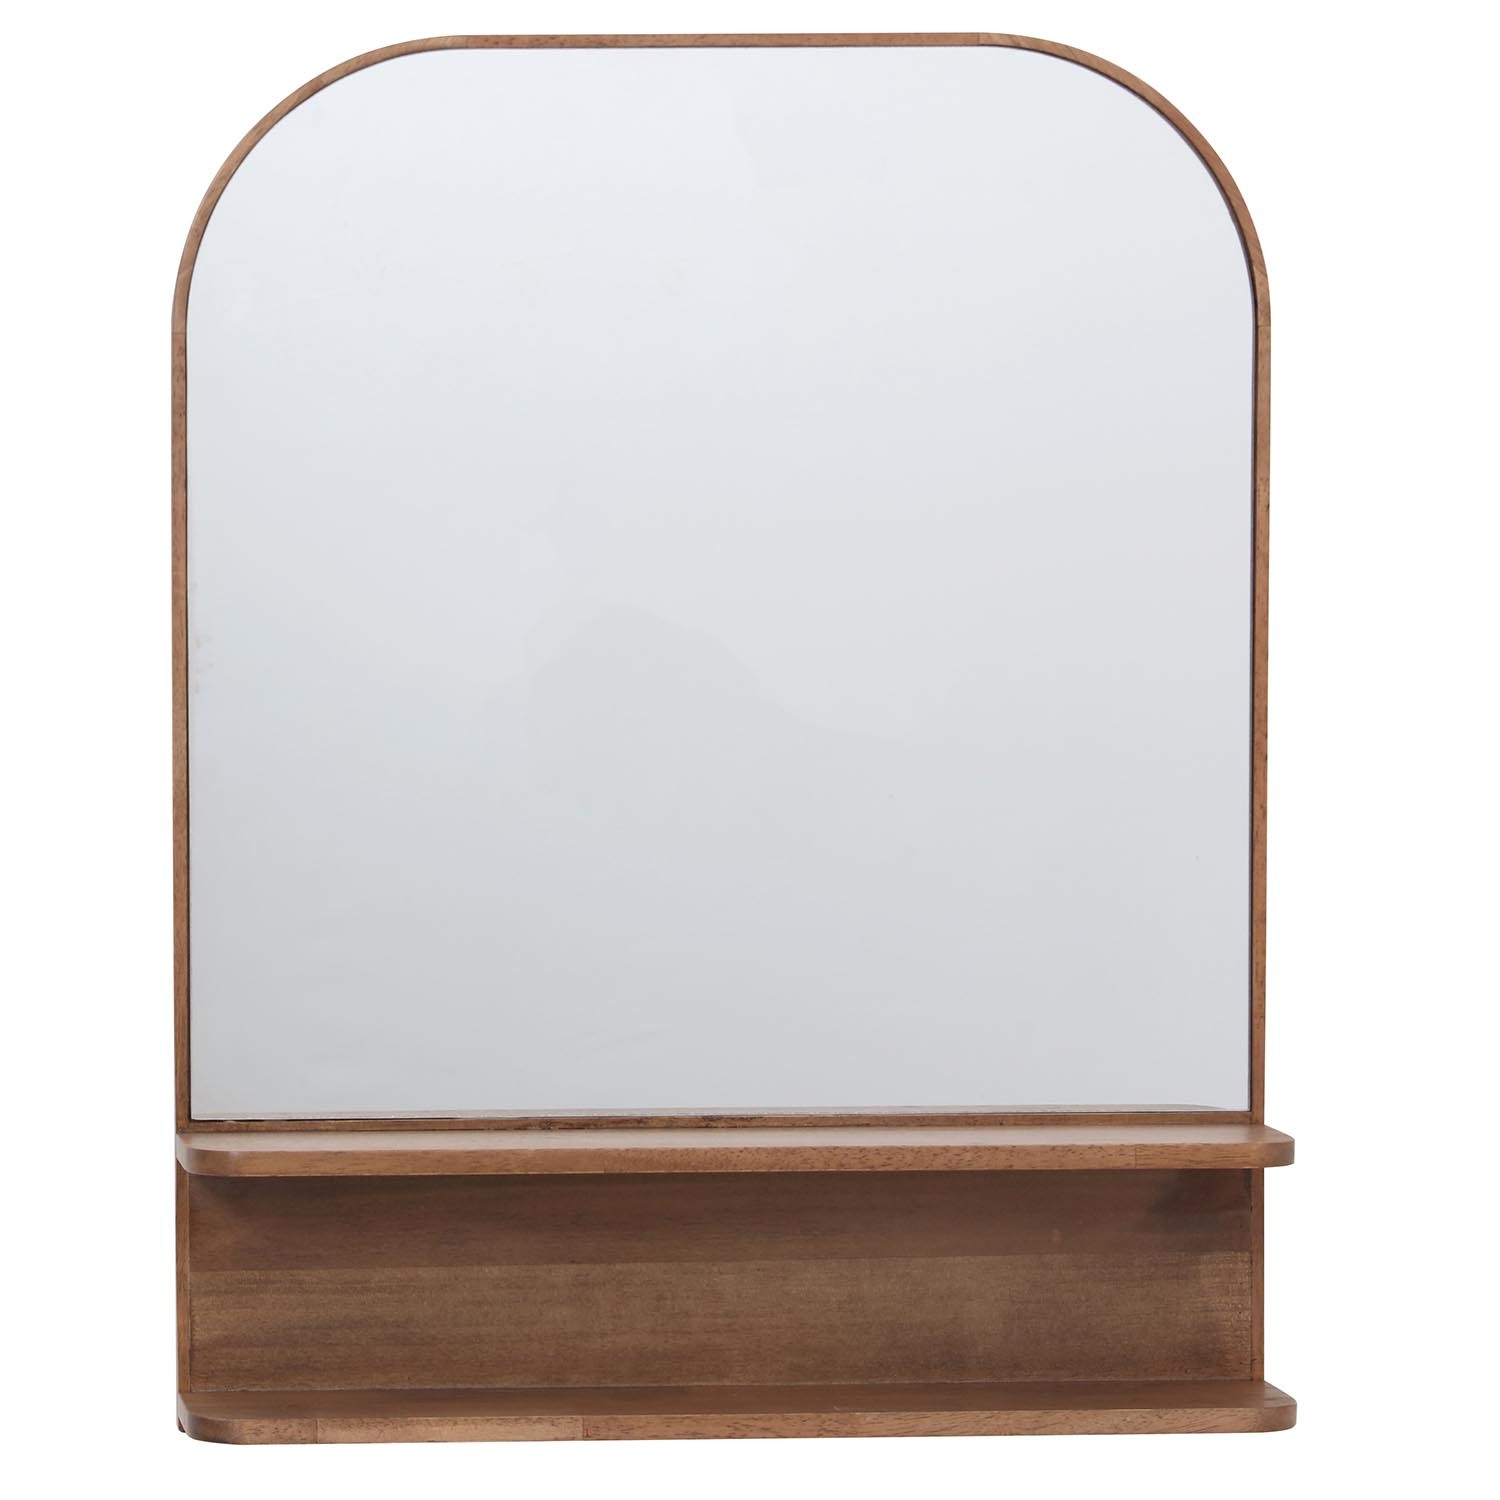 Brown Arched Mirror Wooden Shelf Image